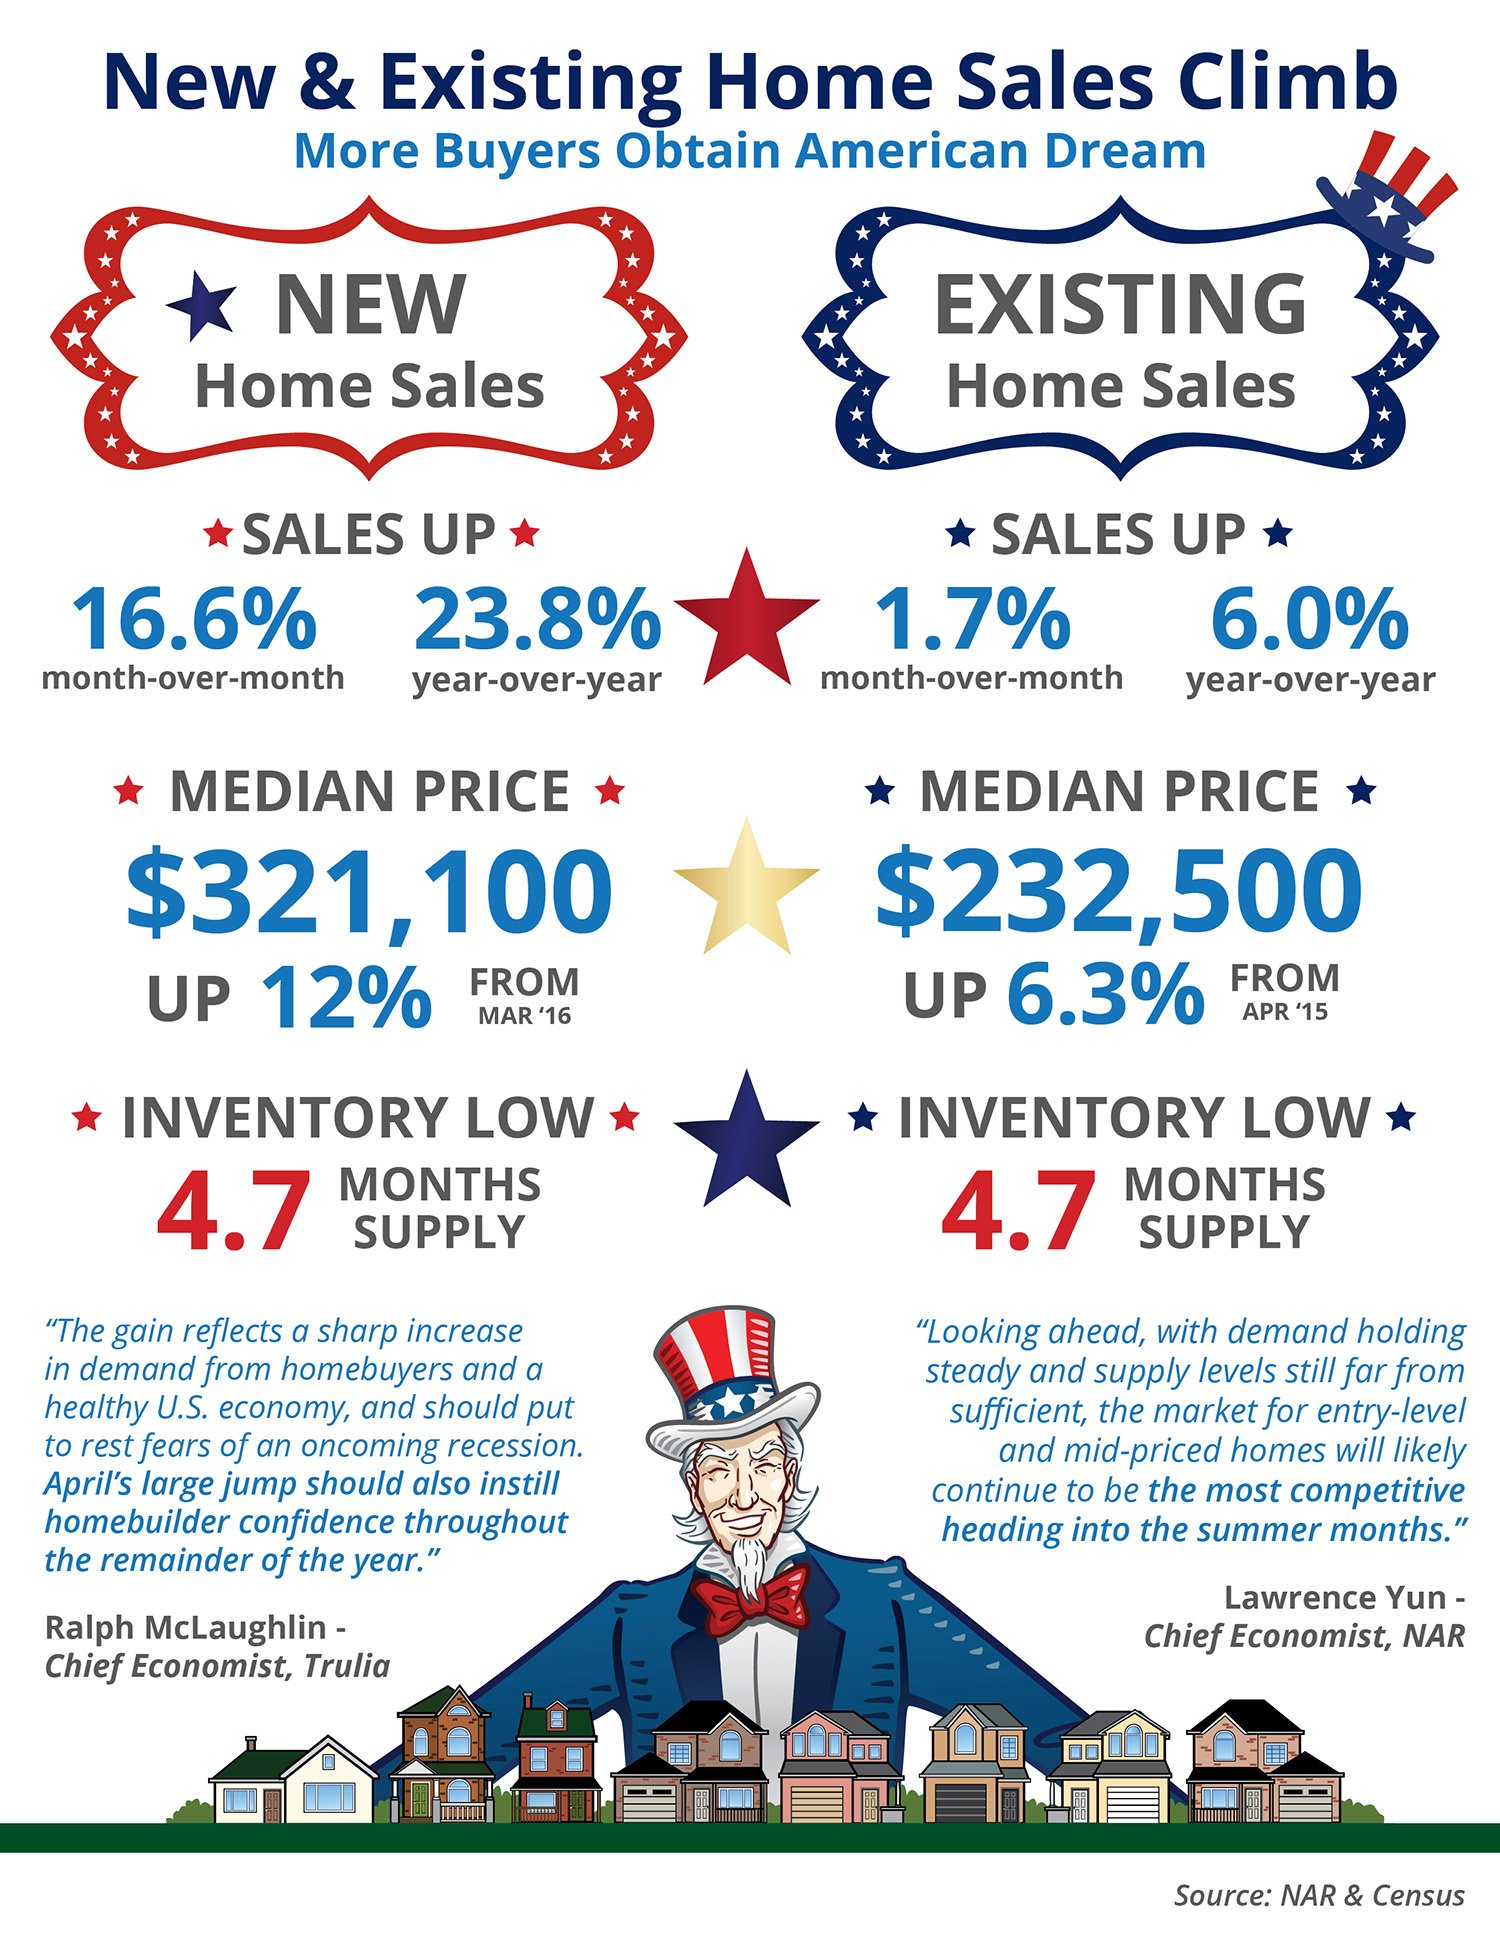 New & Existing Home Sales Climb [INFOGRAPHIC] | Simplifying The Market